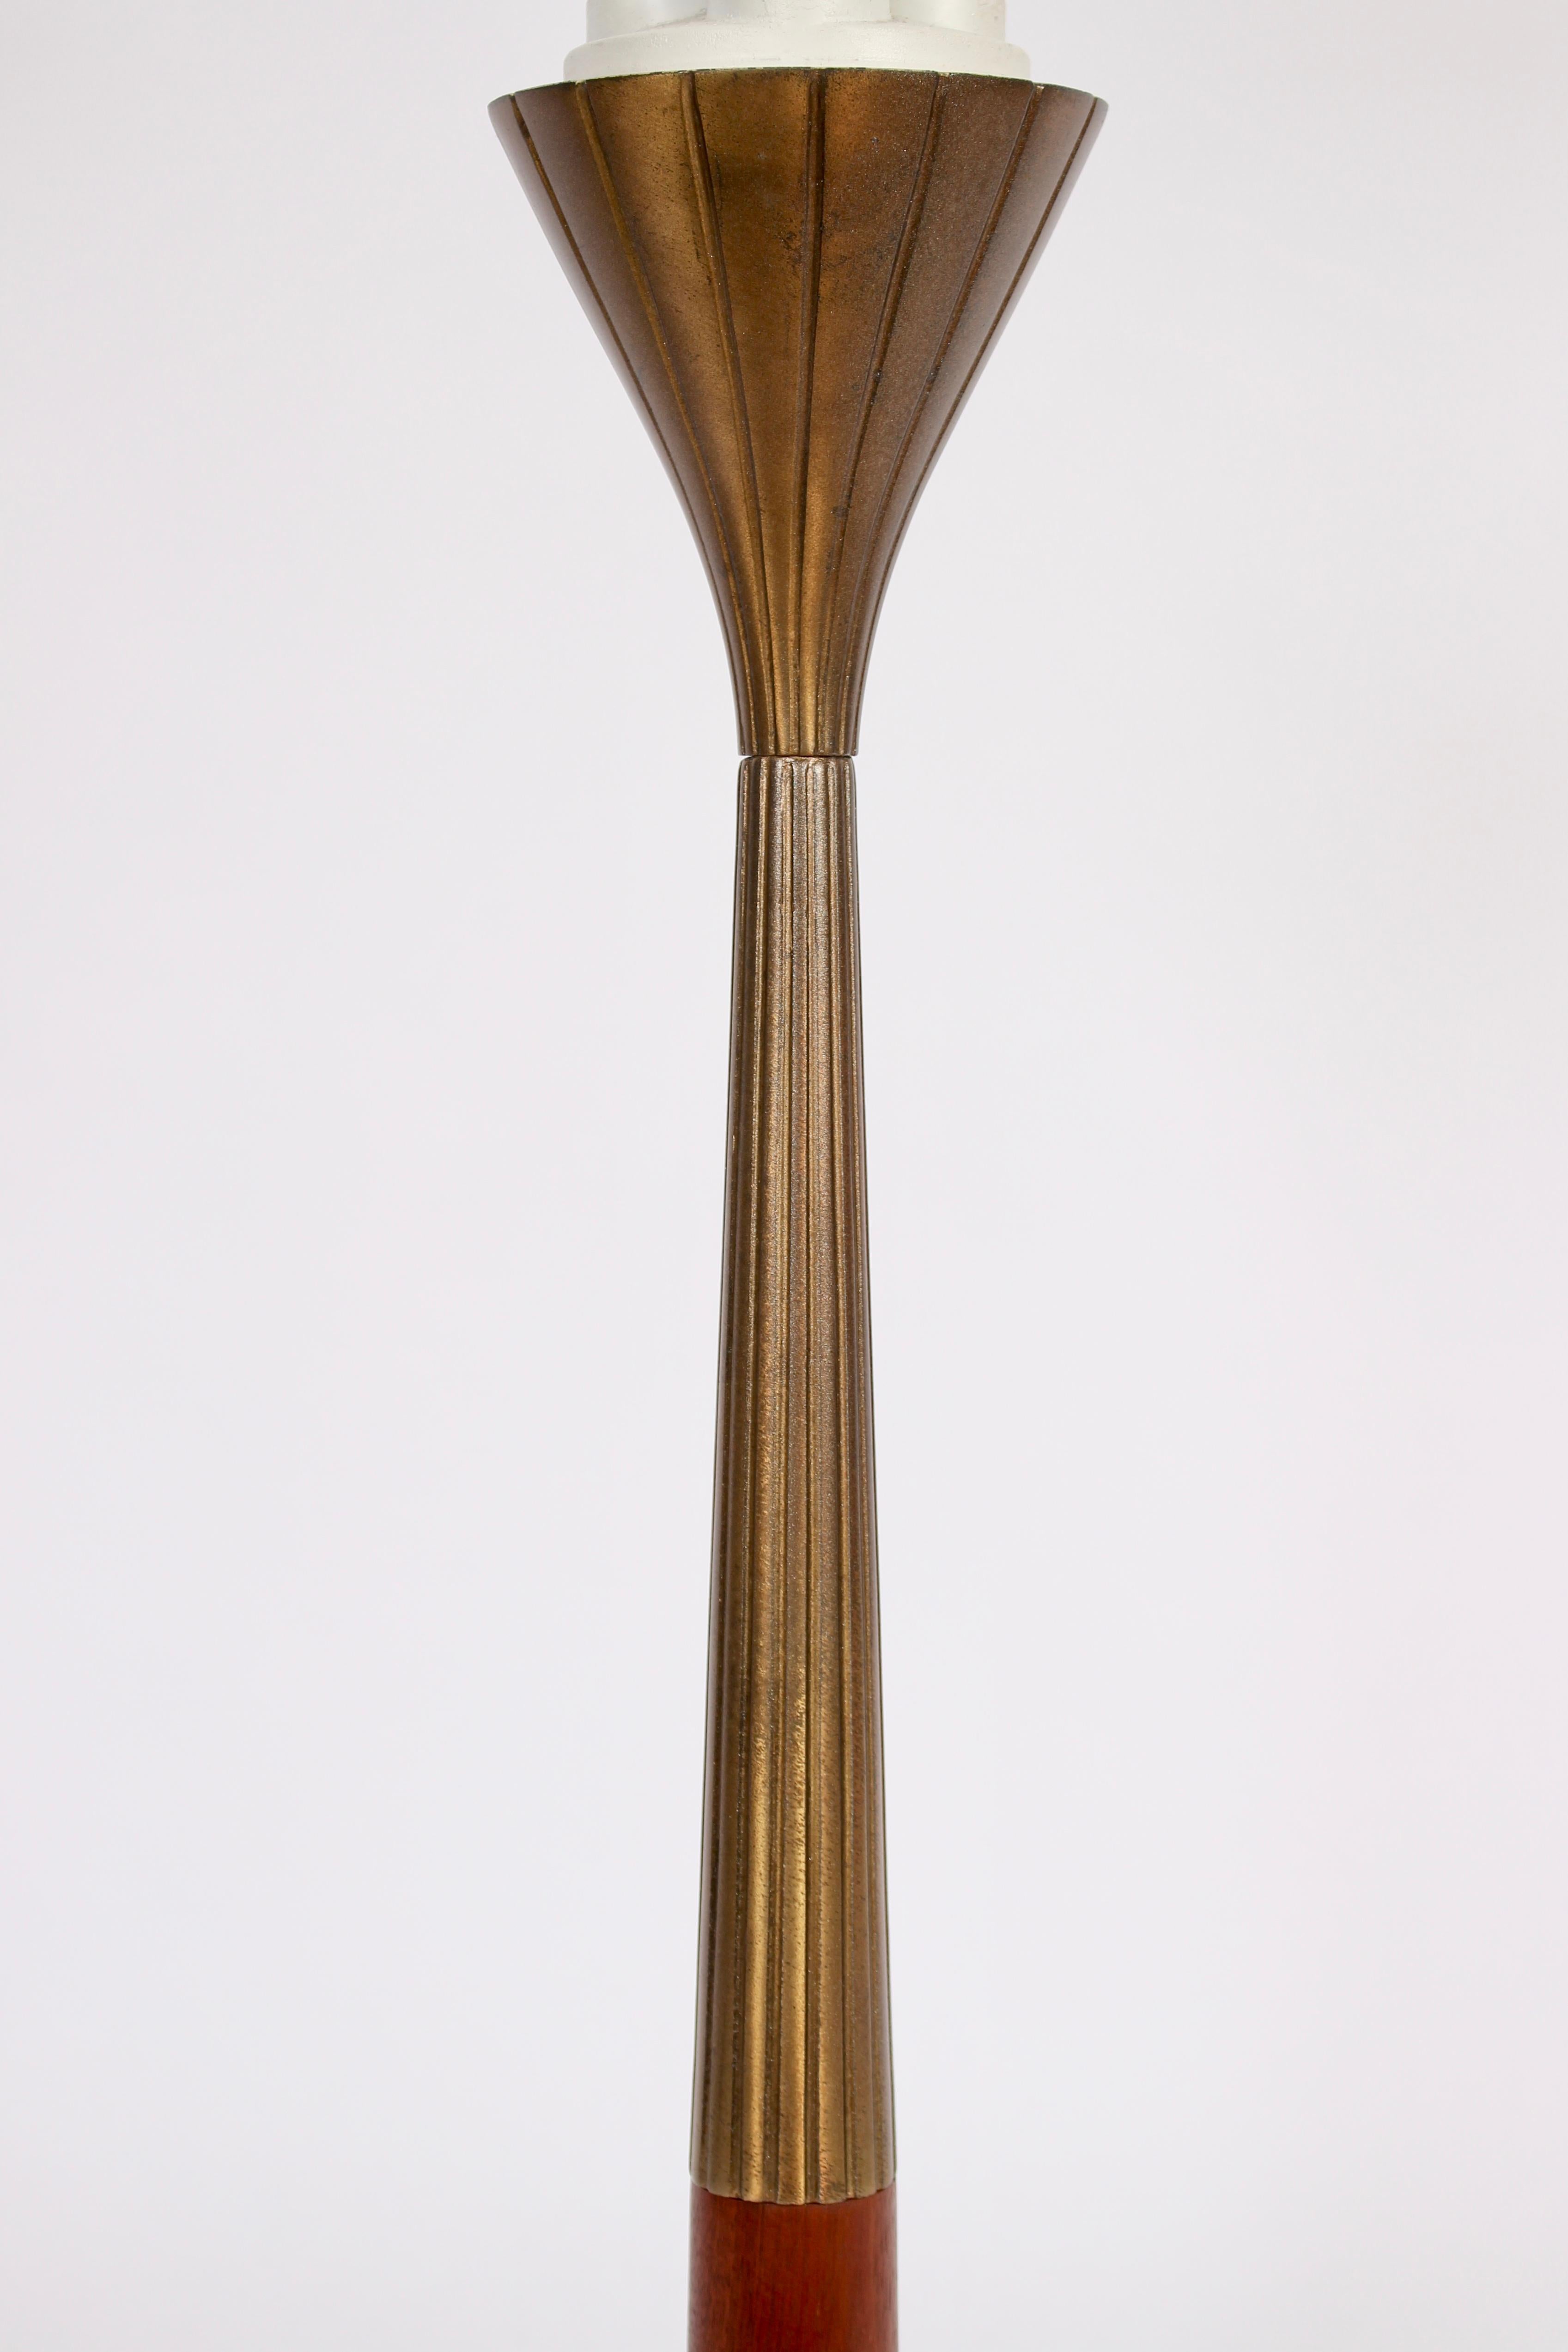 Tall Gerald Thurston for Lightolier Radiating Brass & Walnut Table Lamp In Good Condition For Sale In Bainbridge, NY